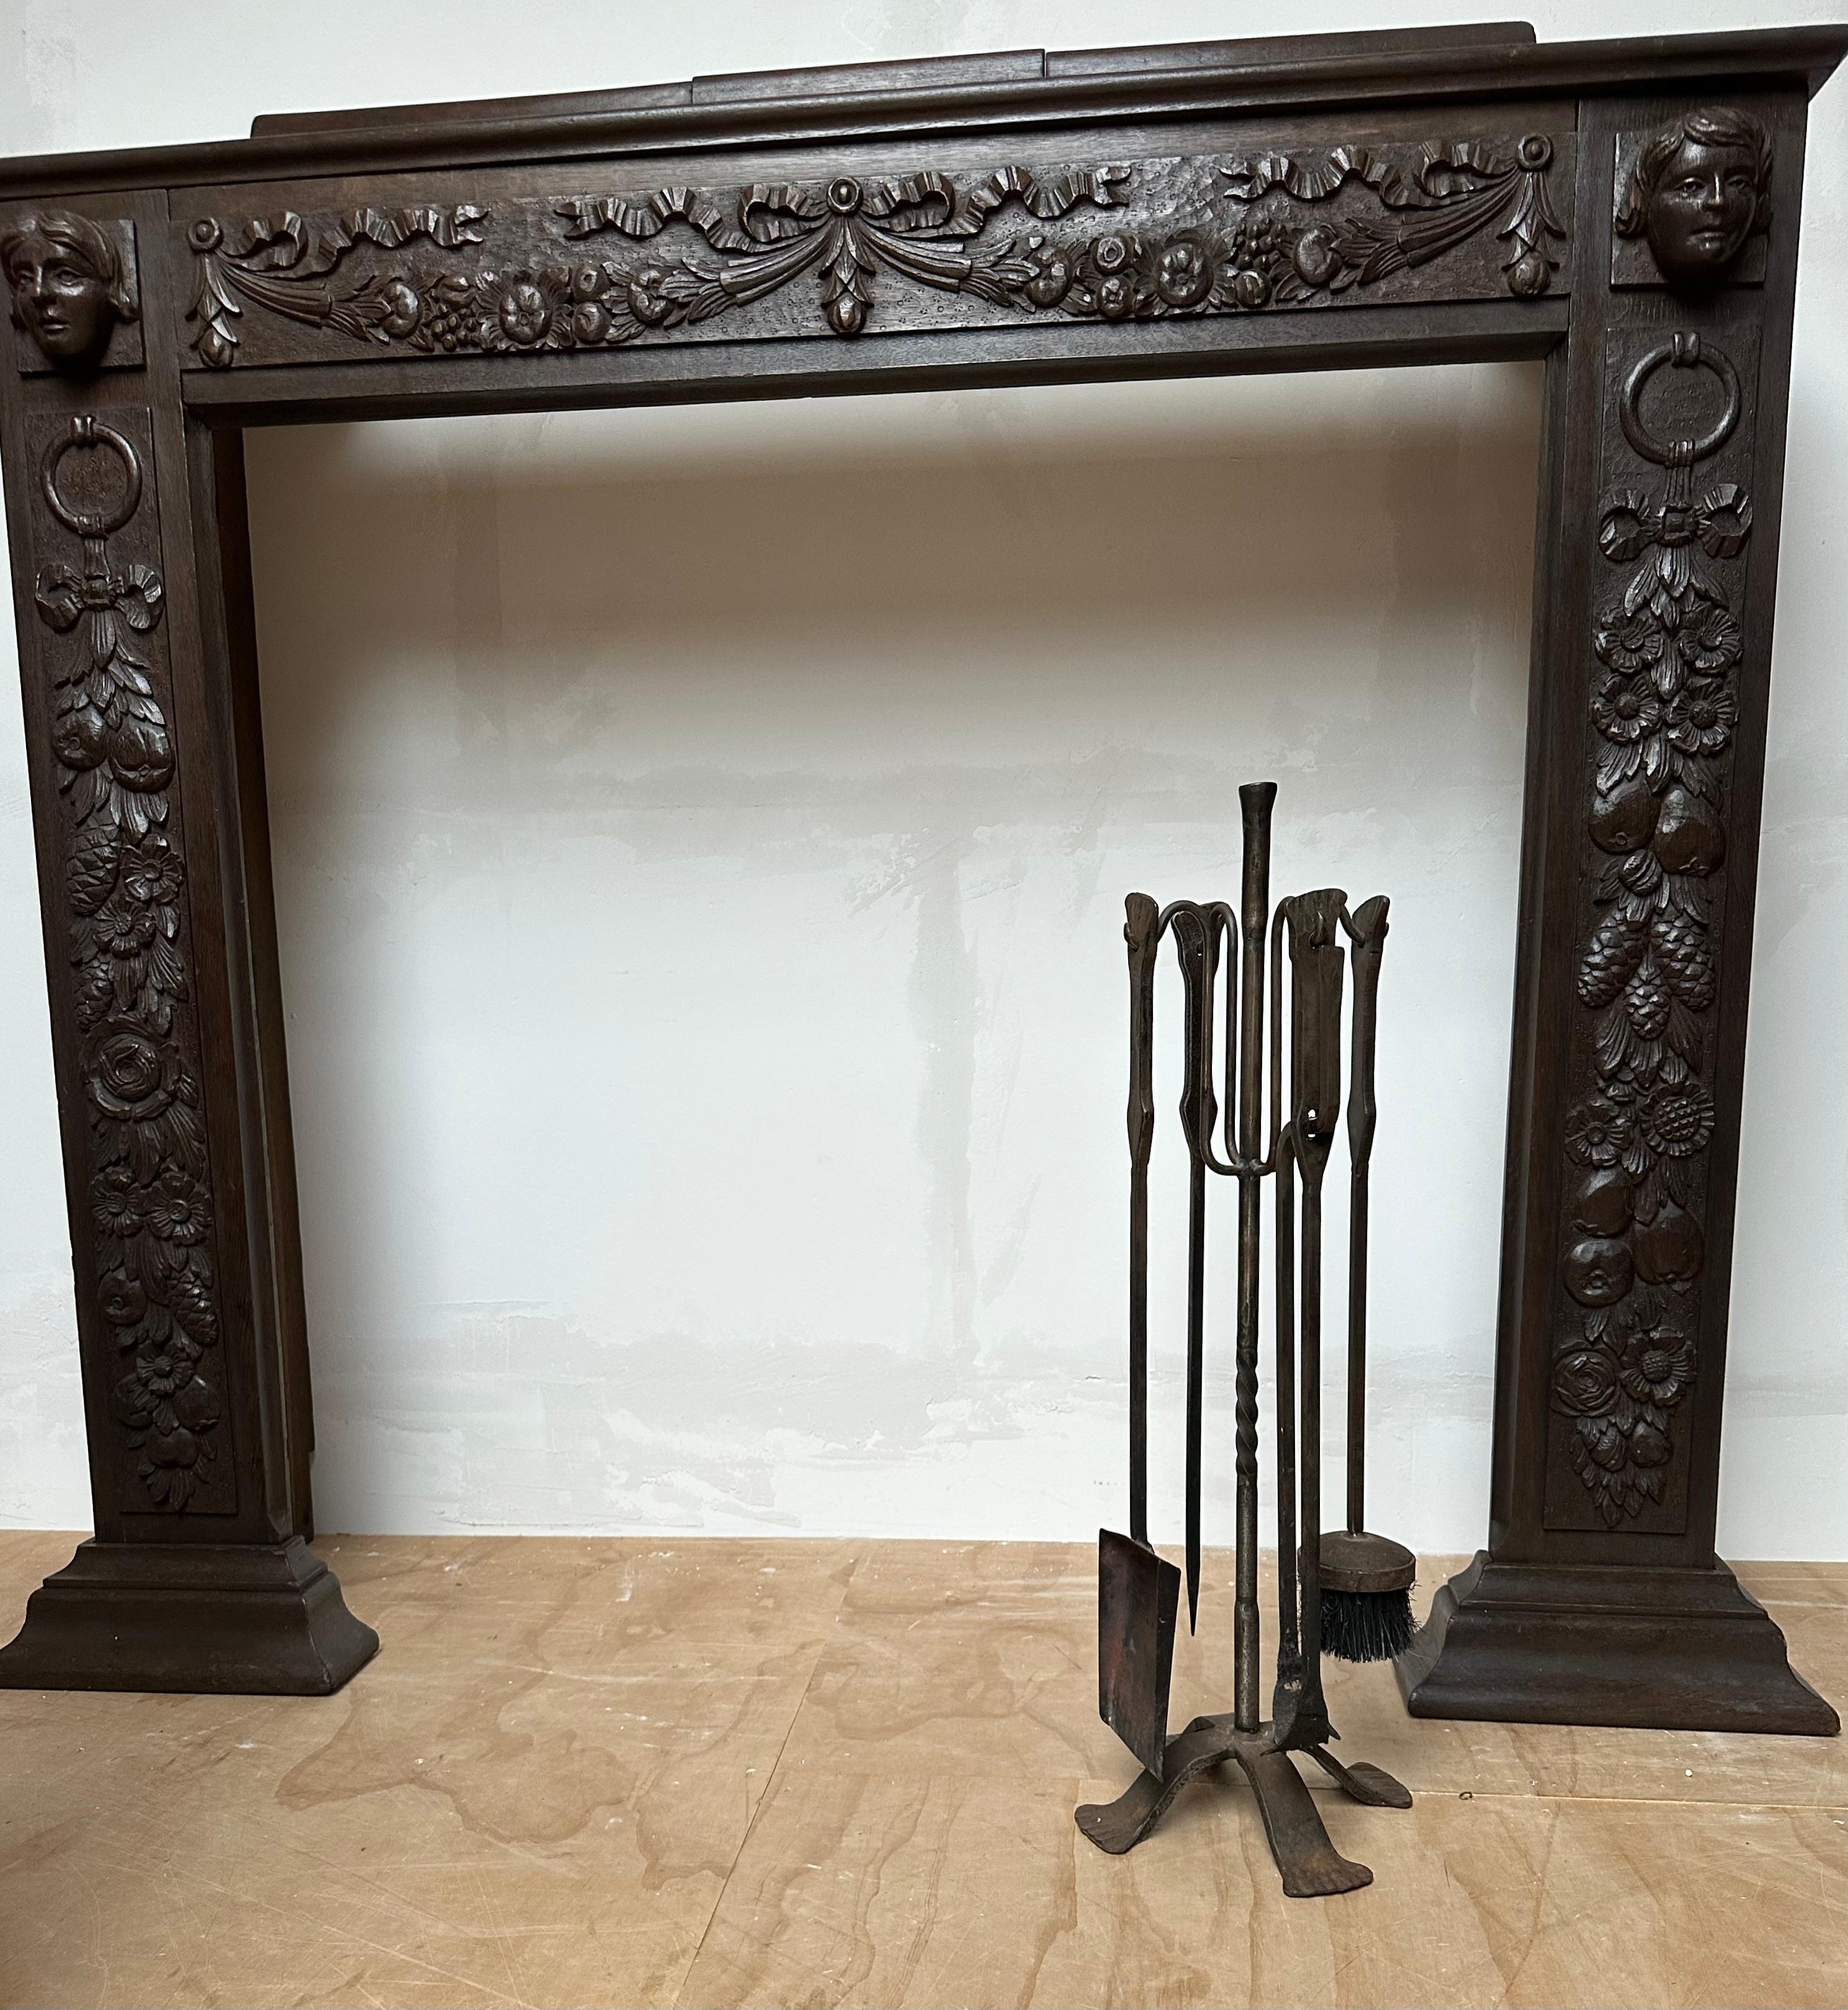 This artistic and strong wrought iron fire set will help manage the fire in your fireplace.

If you are passionate about artistic and handcrafted antiques, then this fireplace set from the Midcentury era could be yours to own and enjoy soon. The